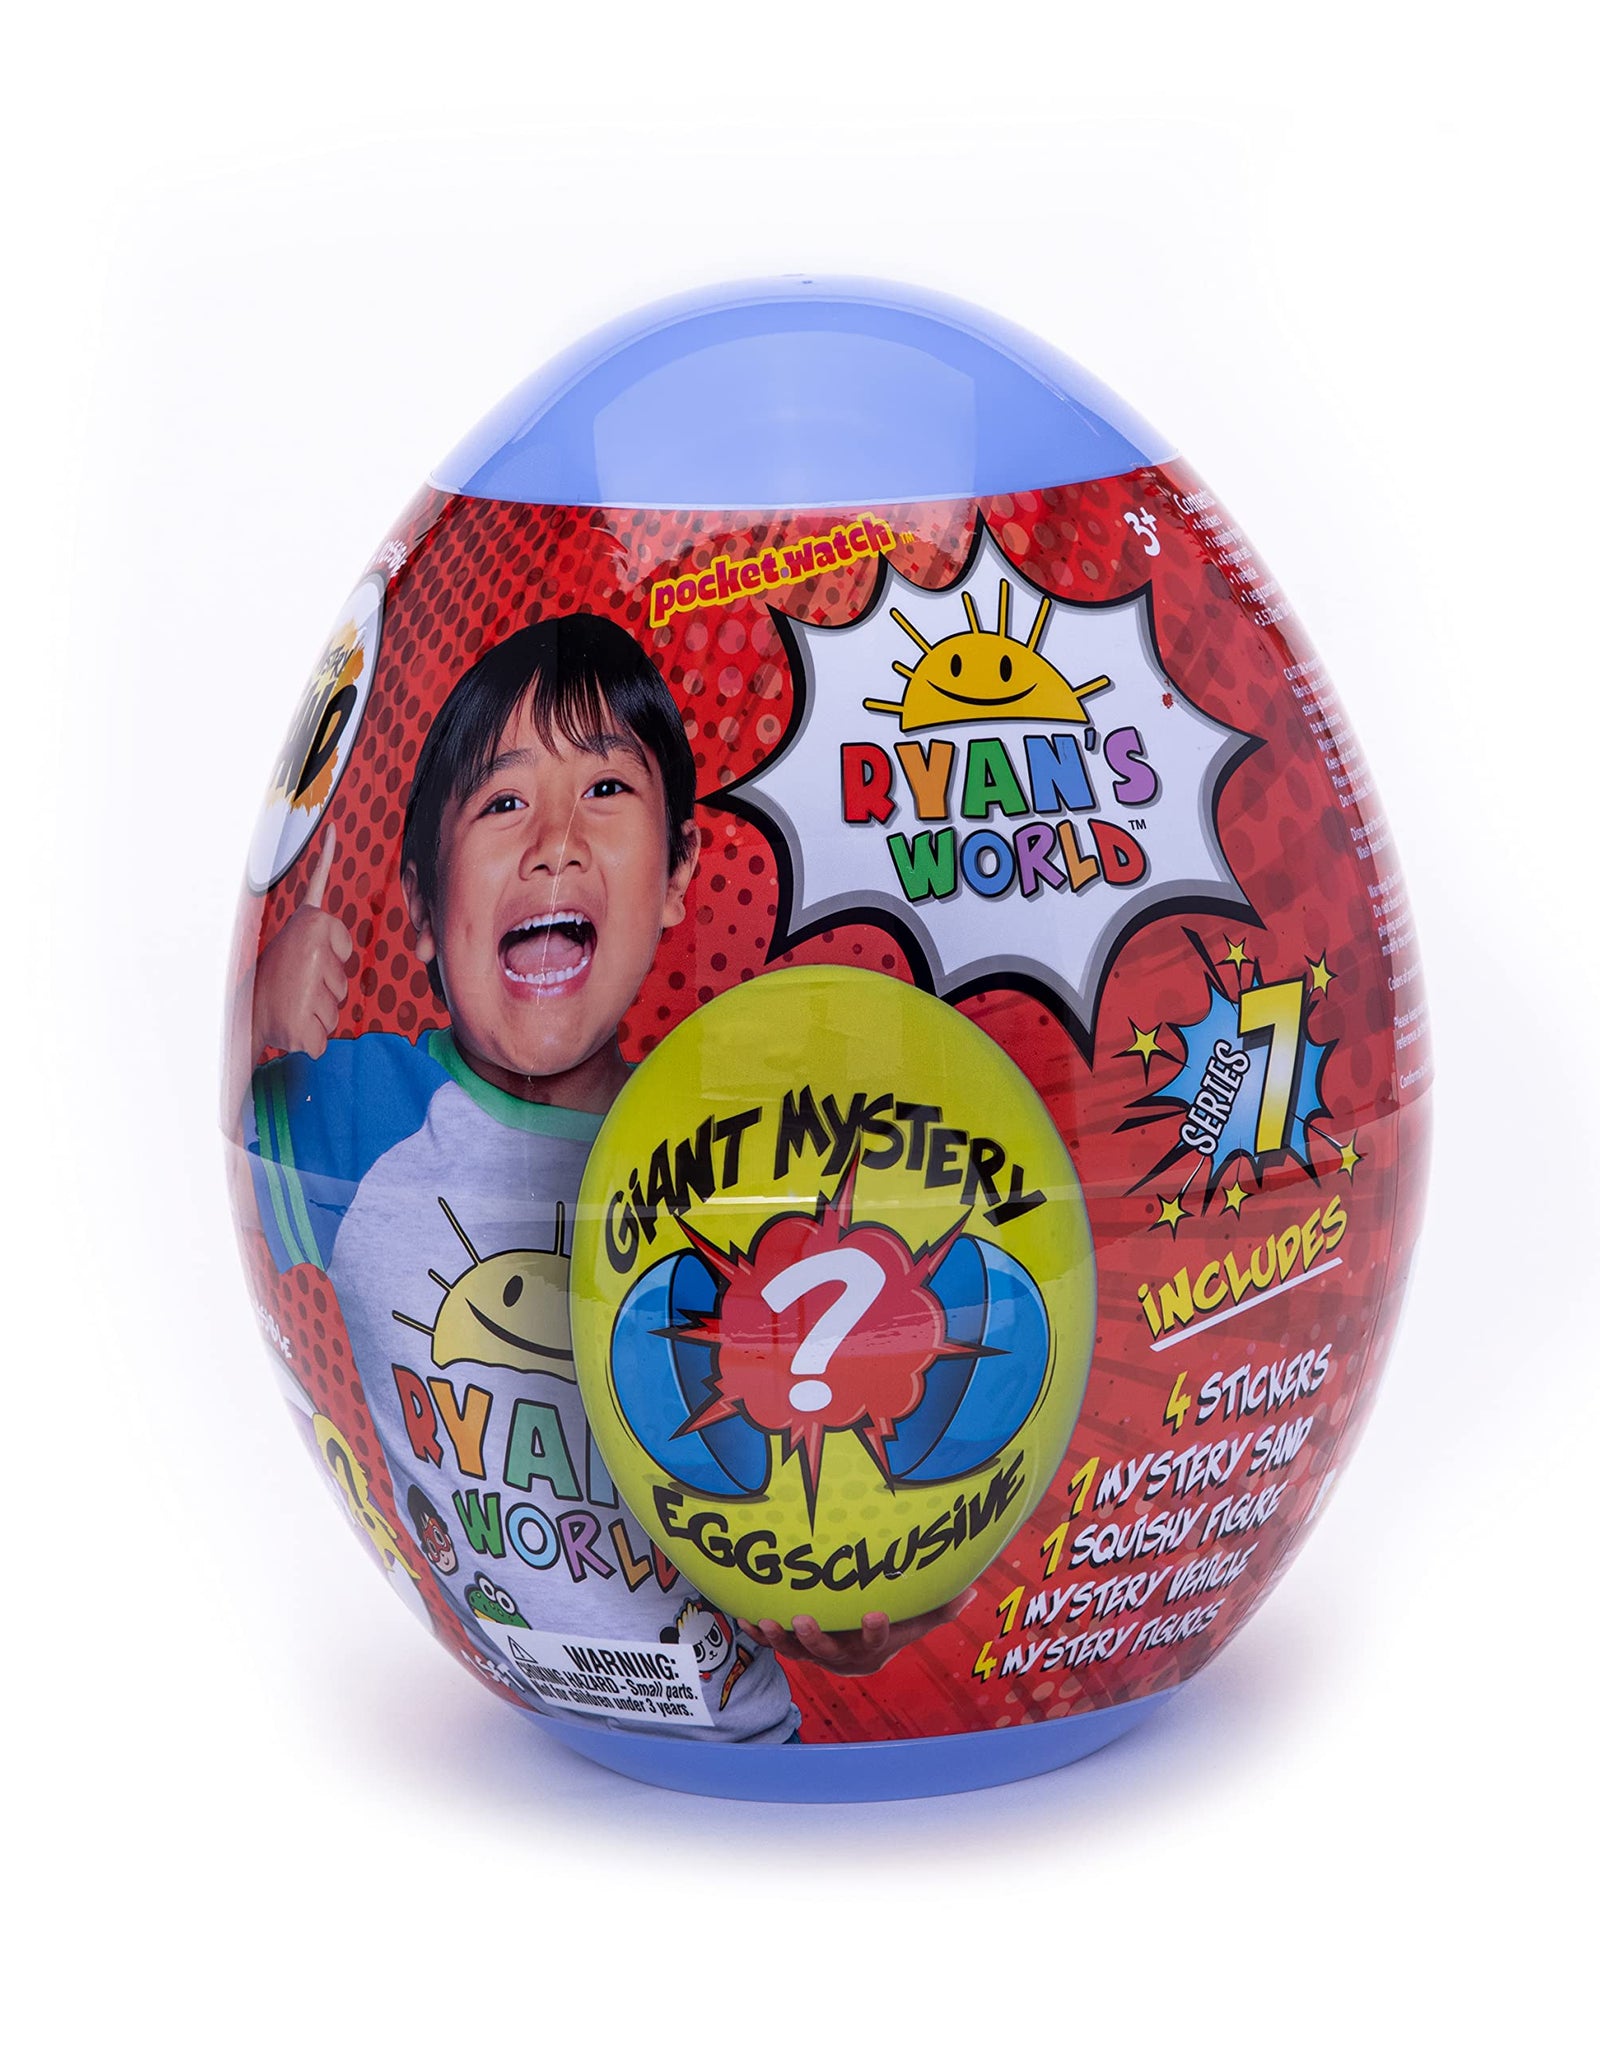 RYAN'S WORLD Giant Mystery Egg Series 5, Filled with Surprises, 1 of 3 Color Variety New Vehicles, 2 Ultra-Rare Figures, 2 Build-a-Ryan Figures, Special Putty, 1 Squishy and Stickers, Toy for Kids